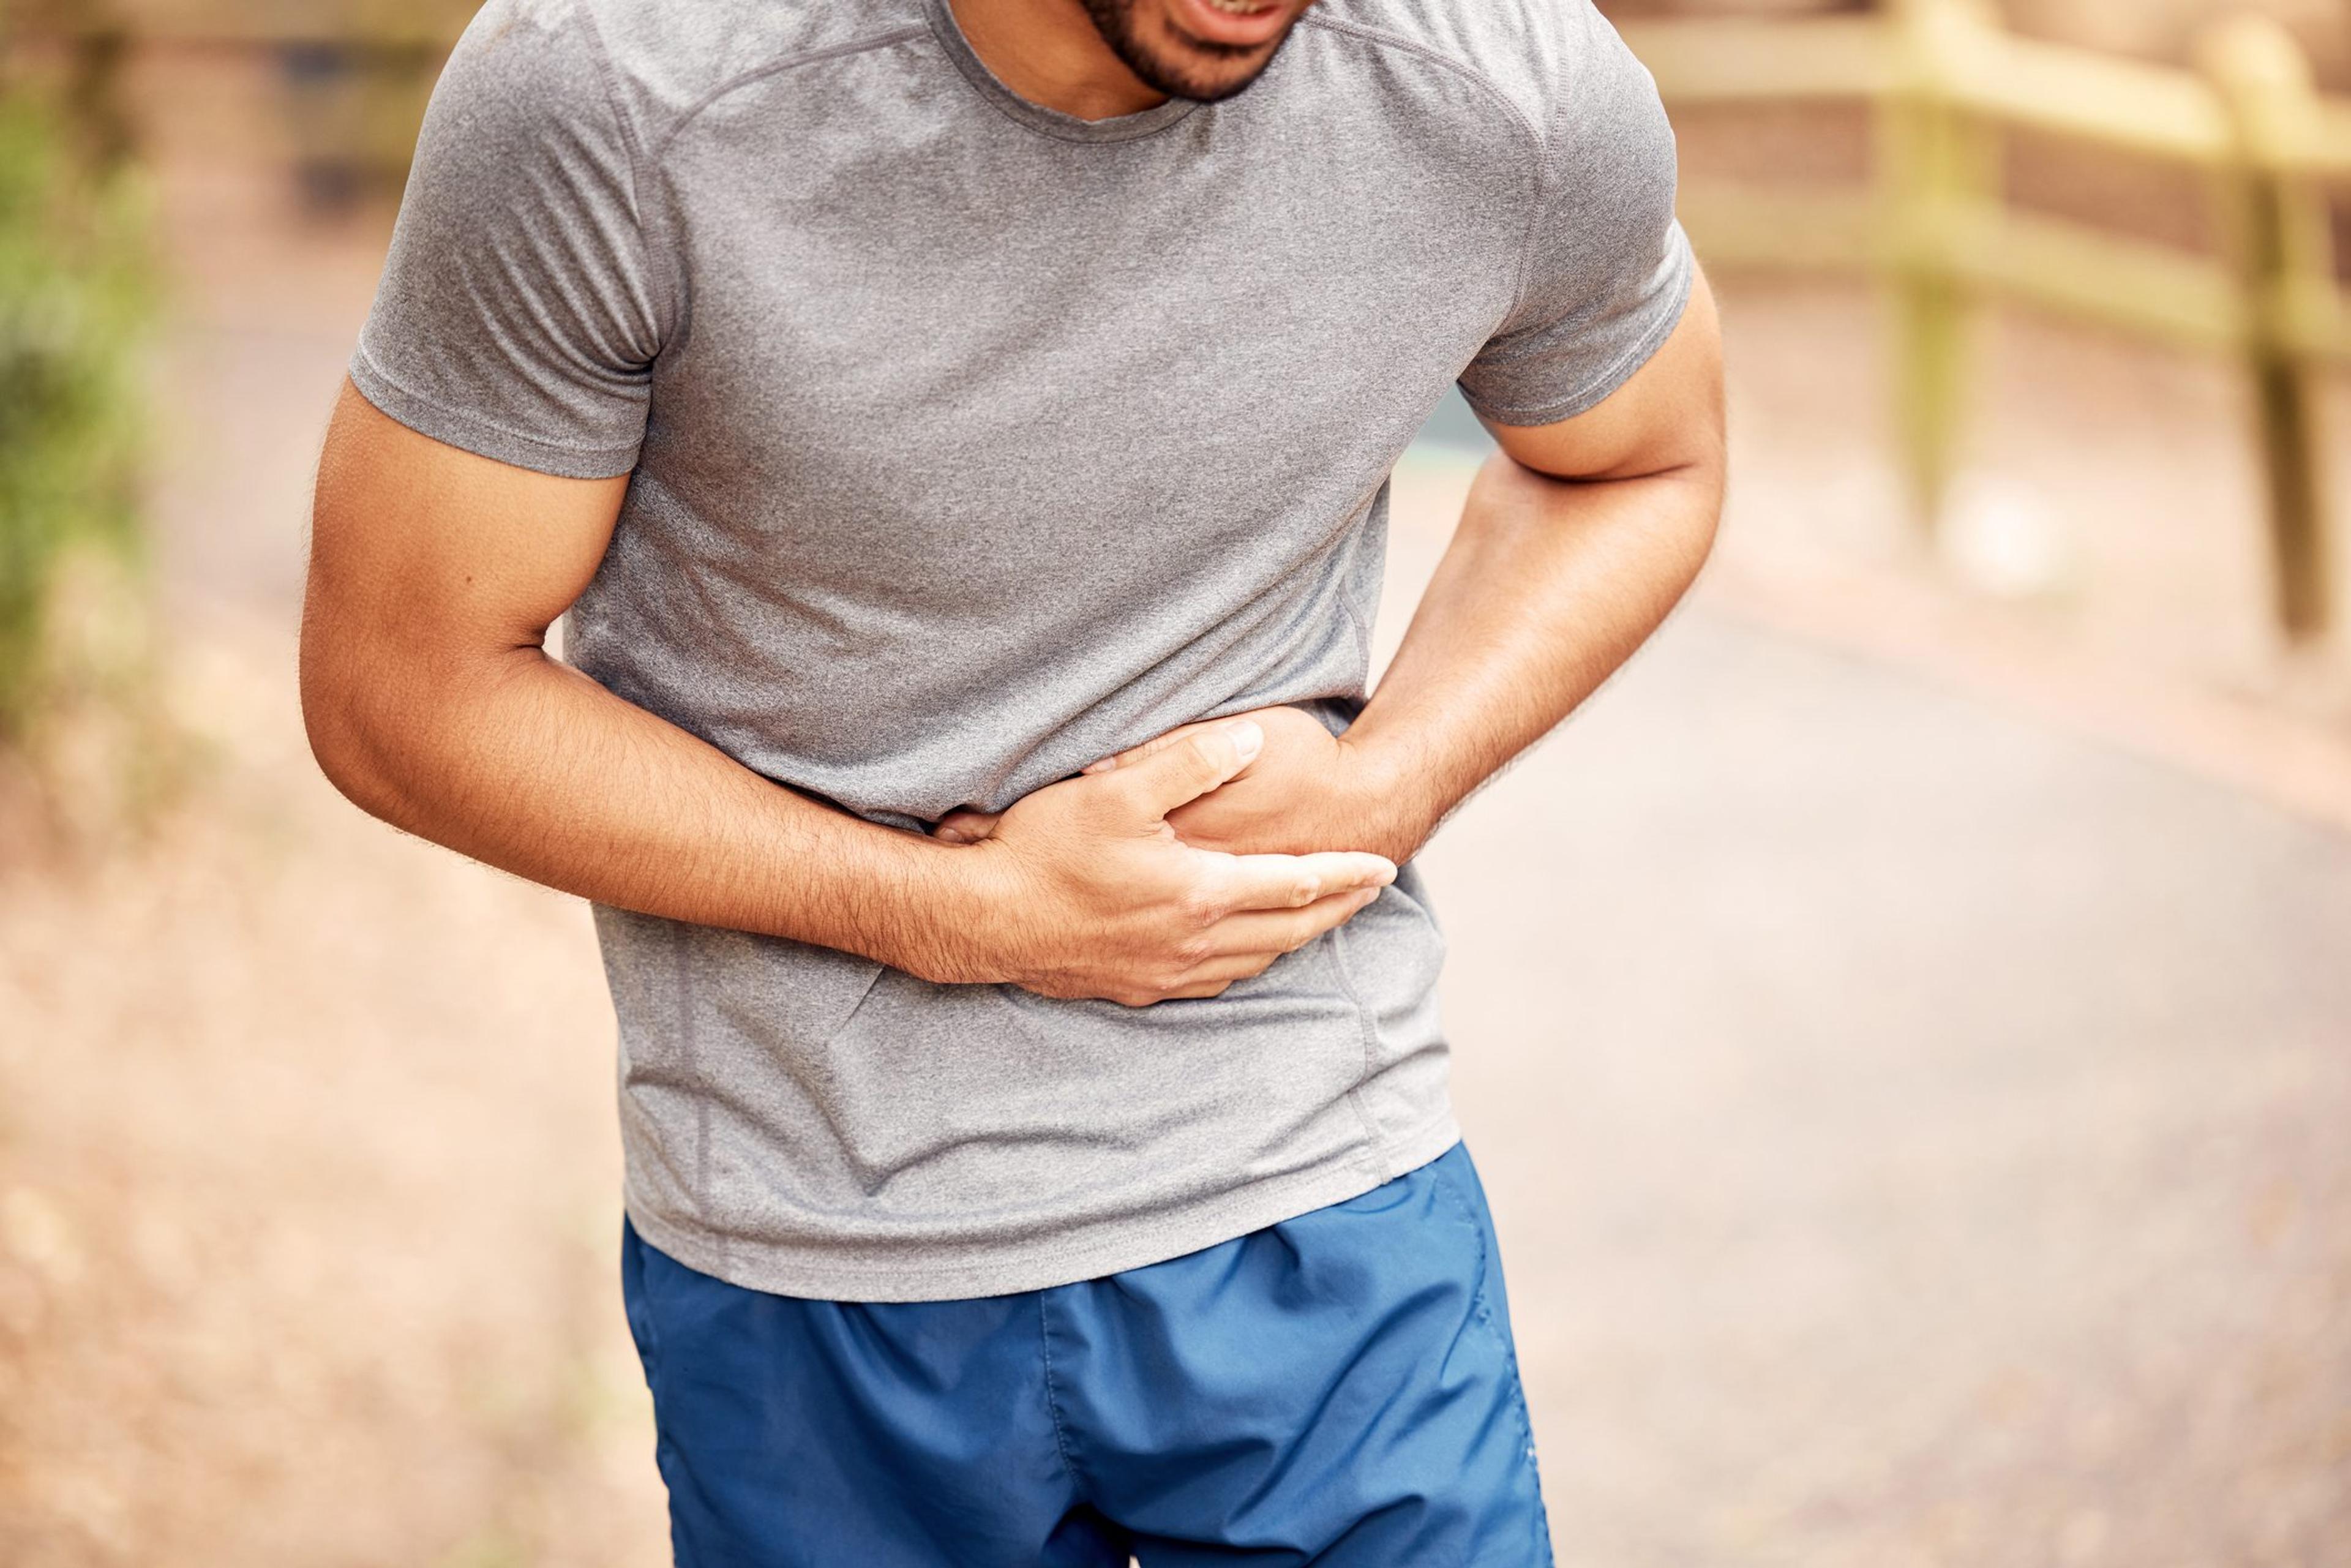 A hernia occurs when an internal organ or other part of the body protrudes through a tear in the muscle wall of the abdomen or groin. Hernias can range in size, severity, and location and are common in both men and women